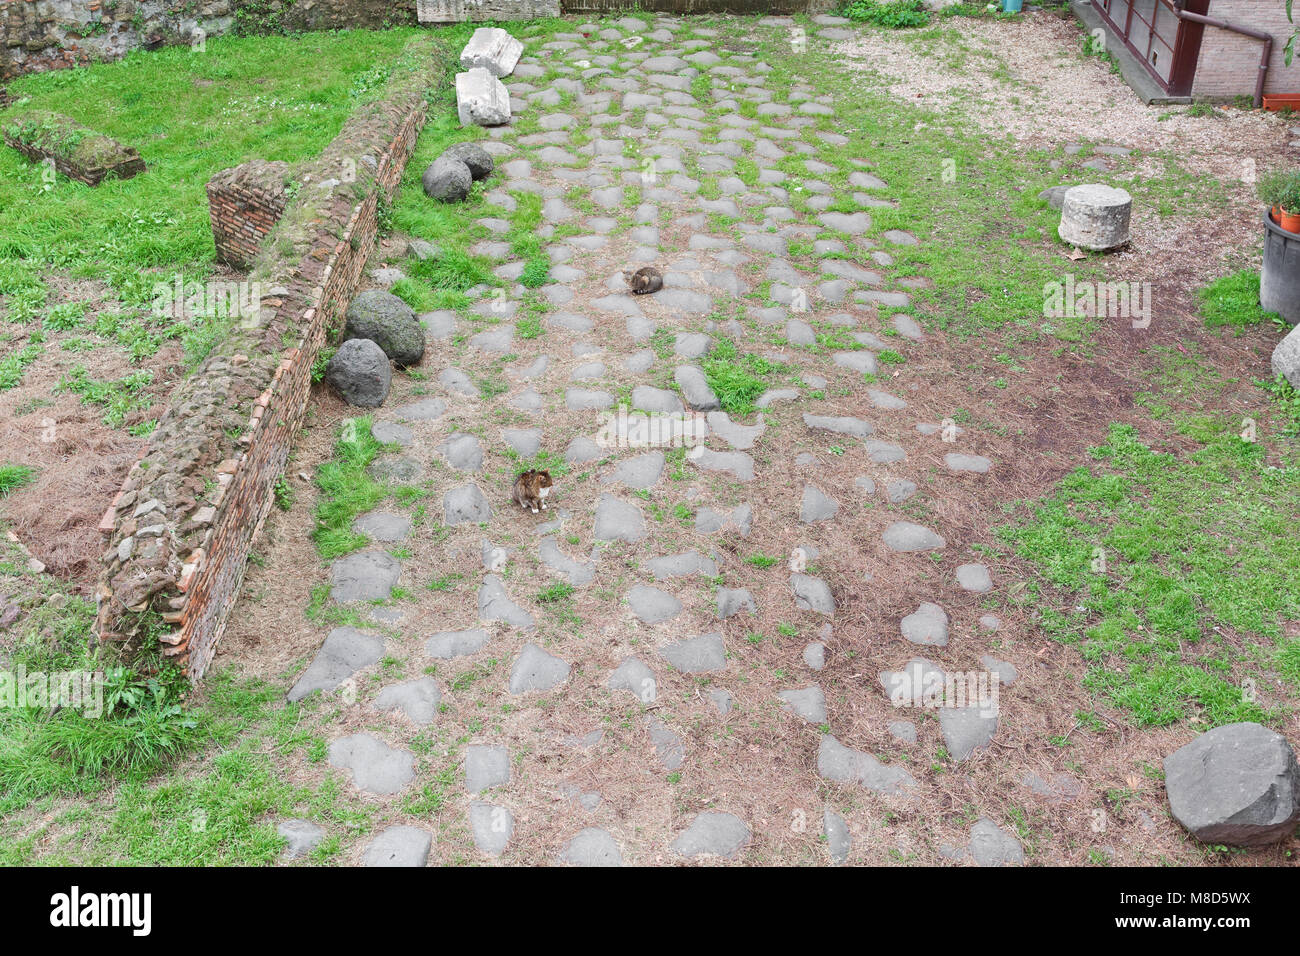 Two cats on an old roman road near the Pyramid of Cestius - Rome Stock Photo